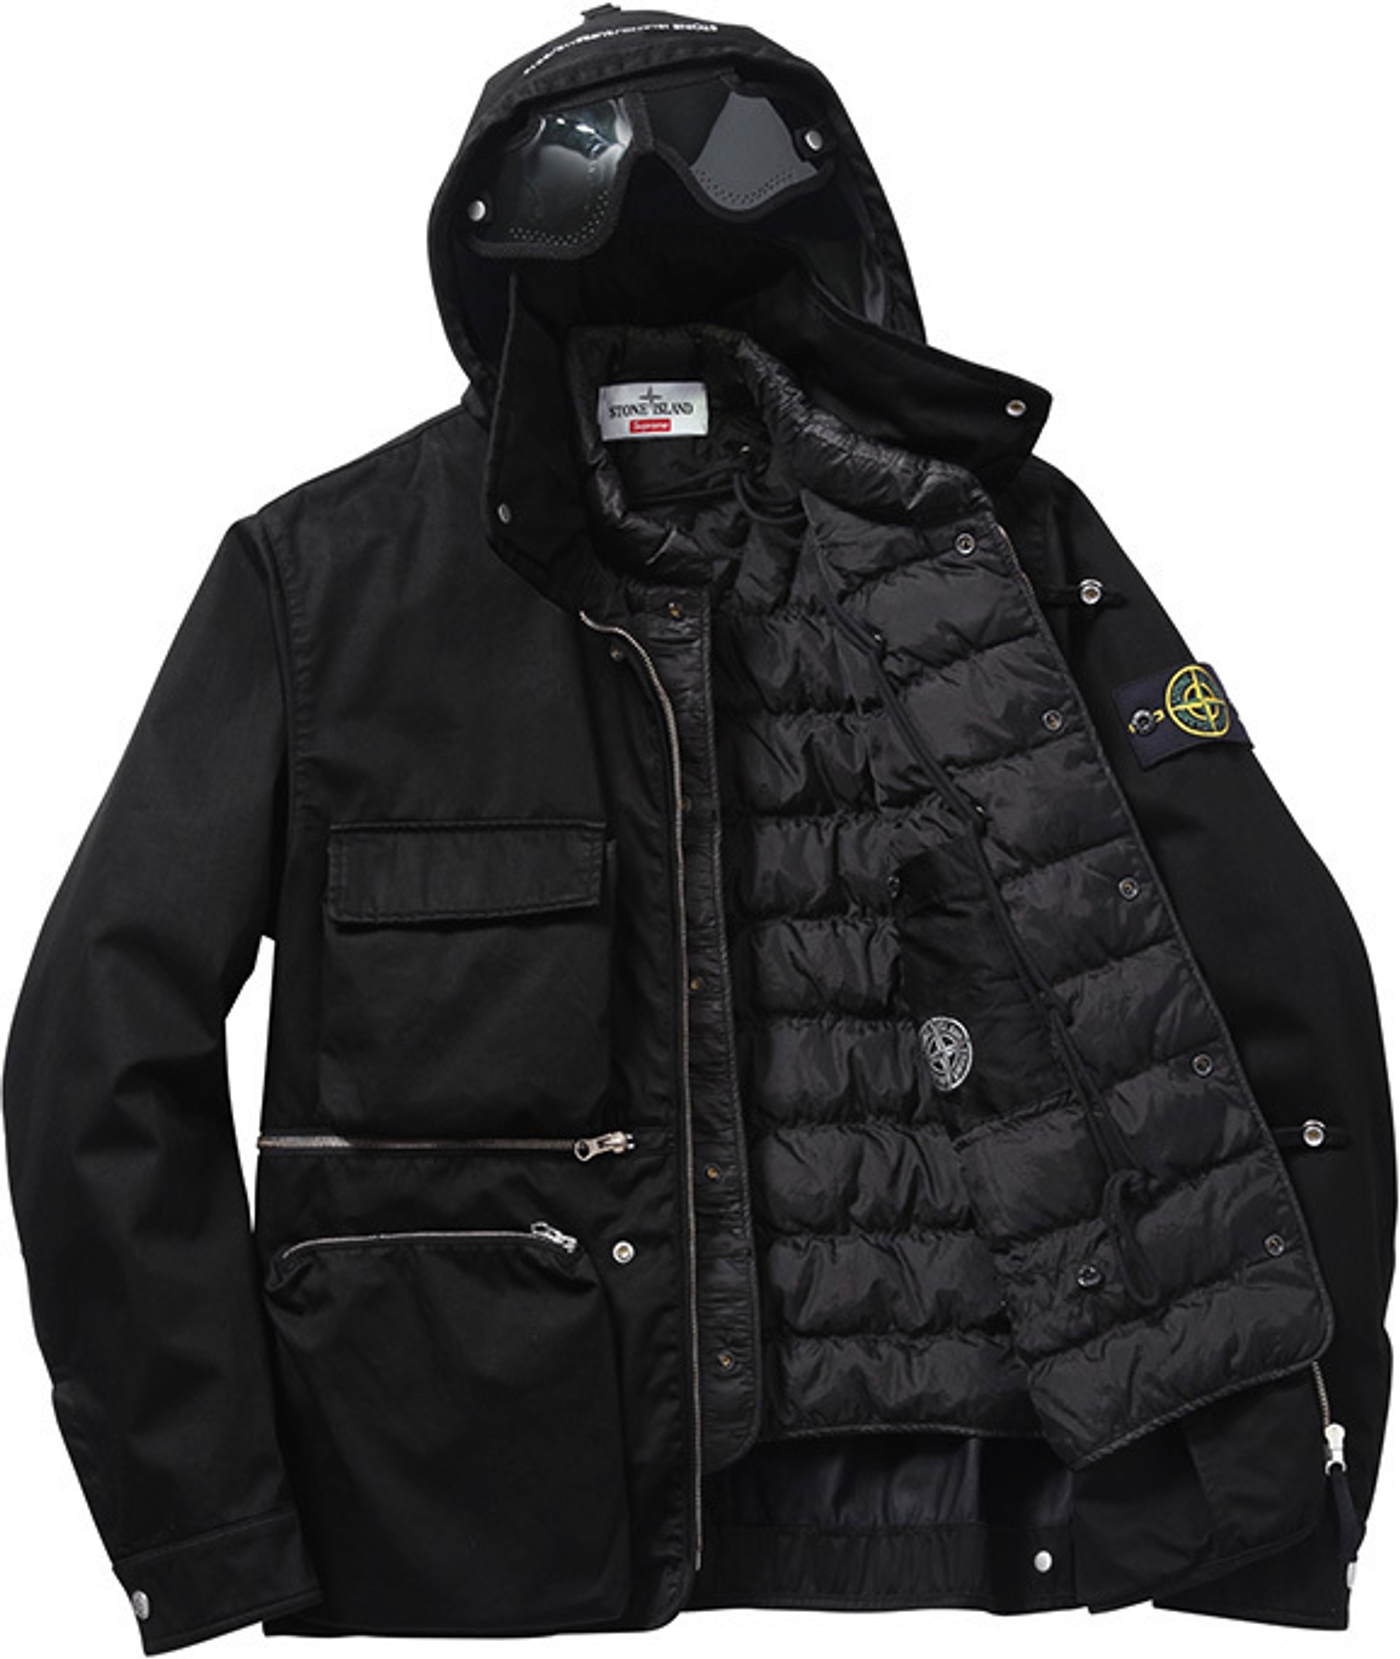 Raso Gommato Cover Nero Jacket 
Wind and water-resistant cotton with removable down liner. Removable eye mask with stow away hood.<br>
Made by Stone Island<br> (20/36)